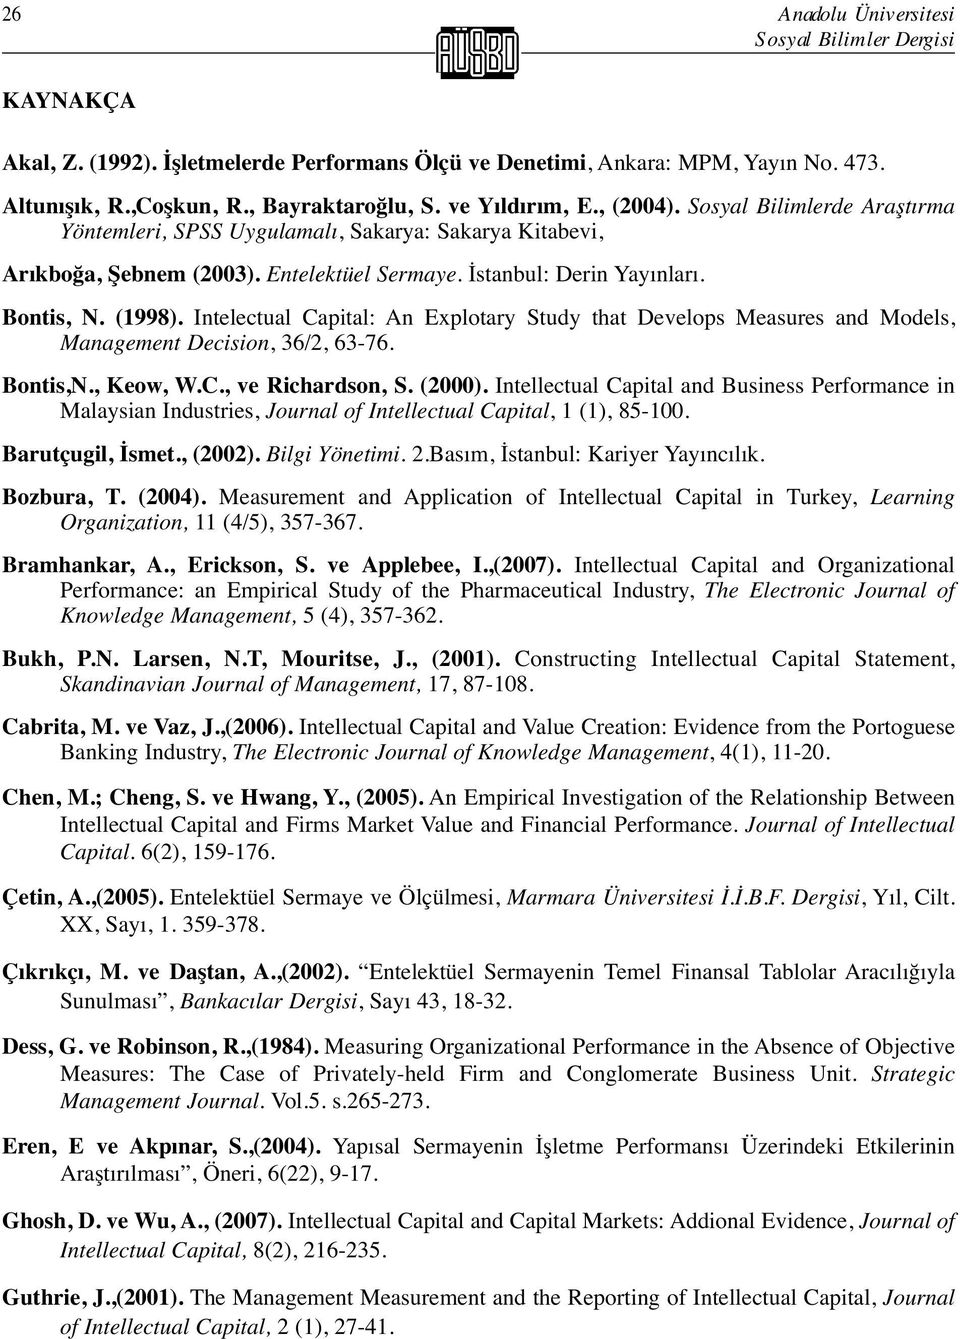 Intelectual Capital: An Explotary Study that Develops Measures and Models, Management Decision, 36/2, 63-76. Bontis,N., Keow, W.C., ve Richardson, S. (2000).